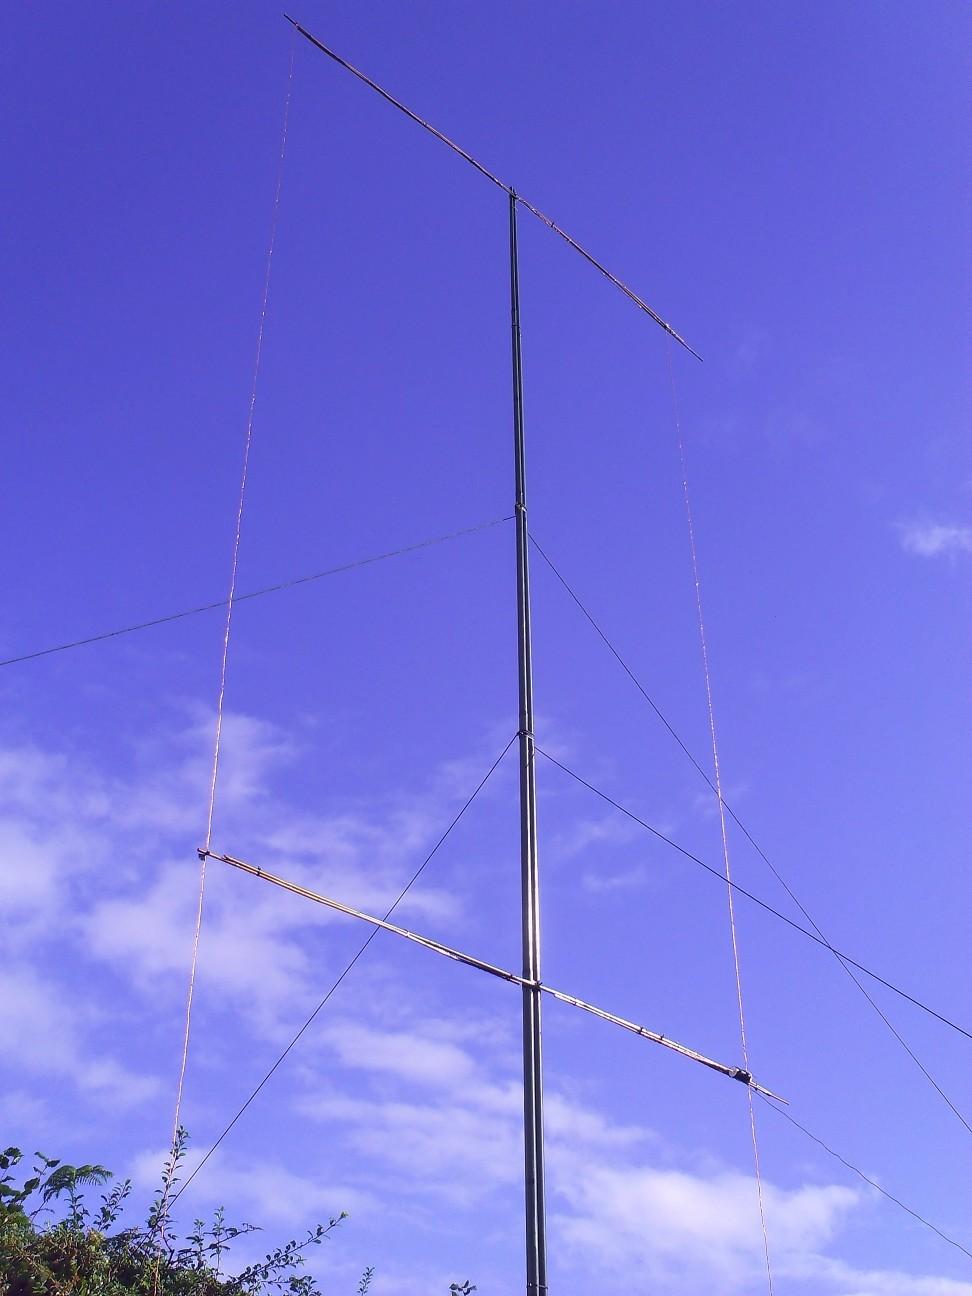 A Reversible Vertical Moxon for 20M I decided to try a vertical moxon rectangle at my new QTH which has